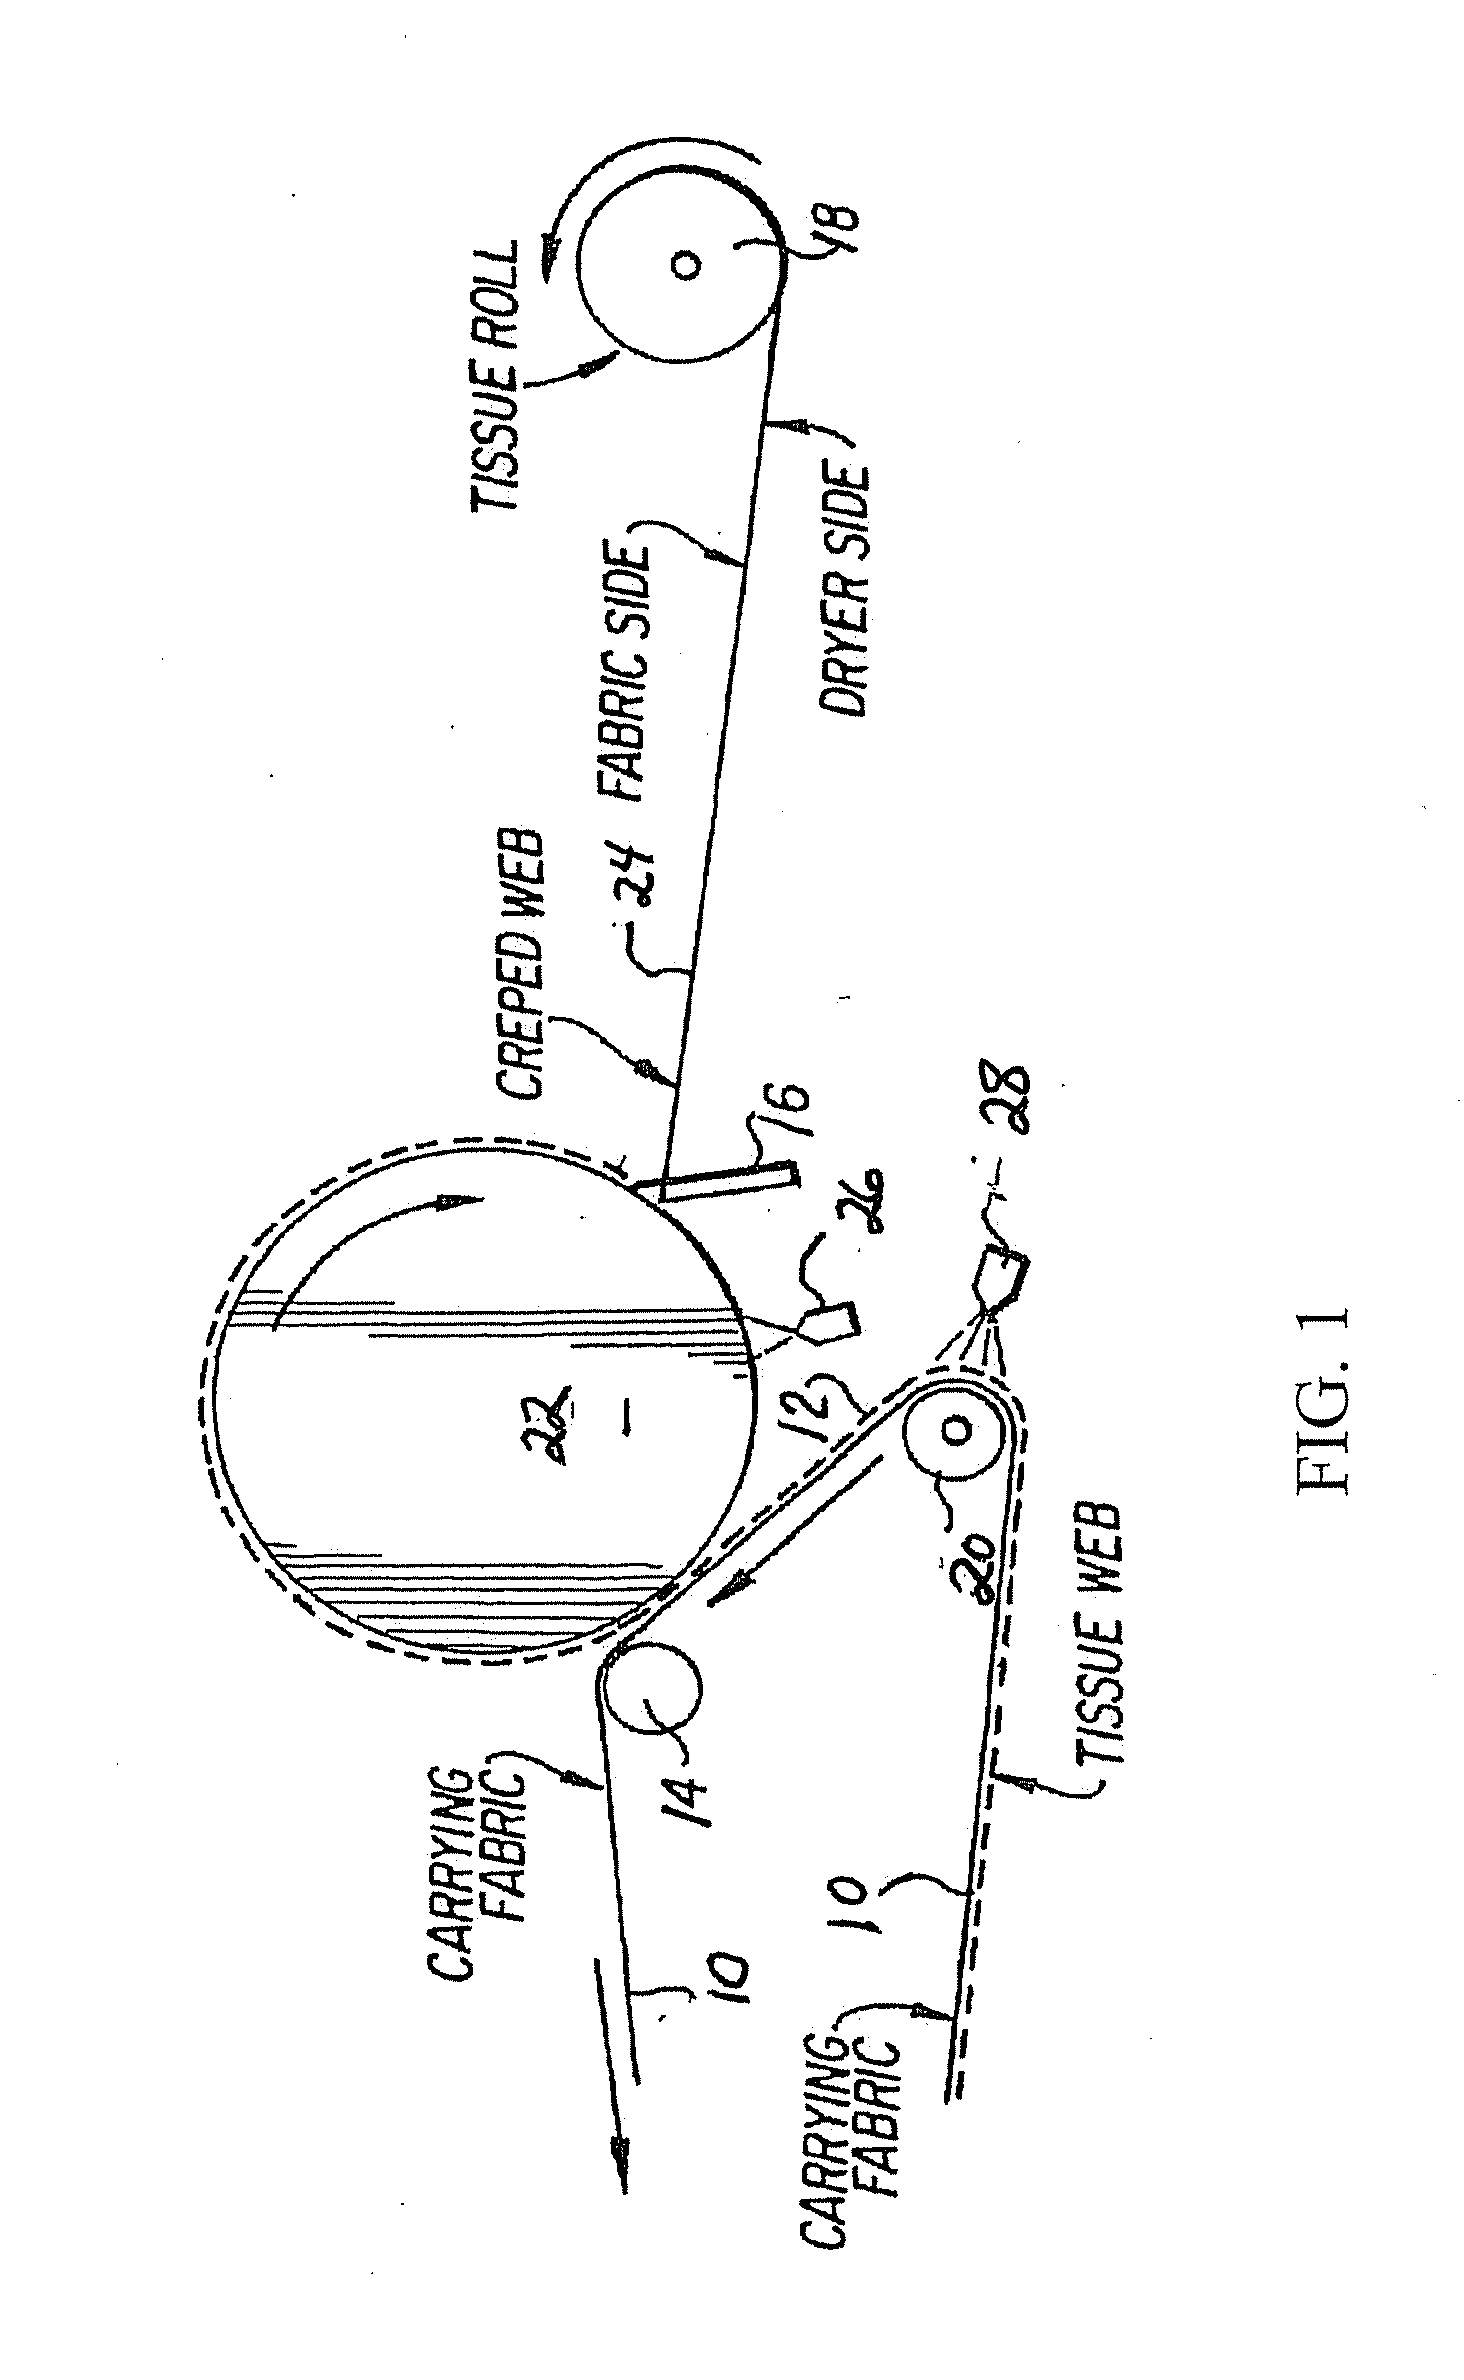 Acidified polyamidoamine adhesives, method of manufacture, and use for creping and play bond applications